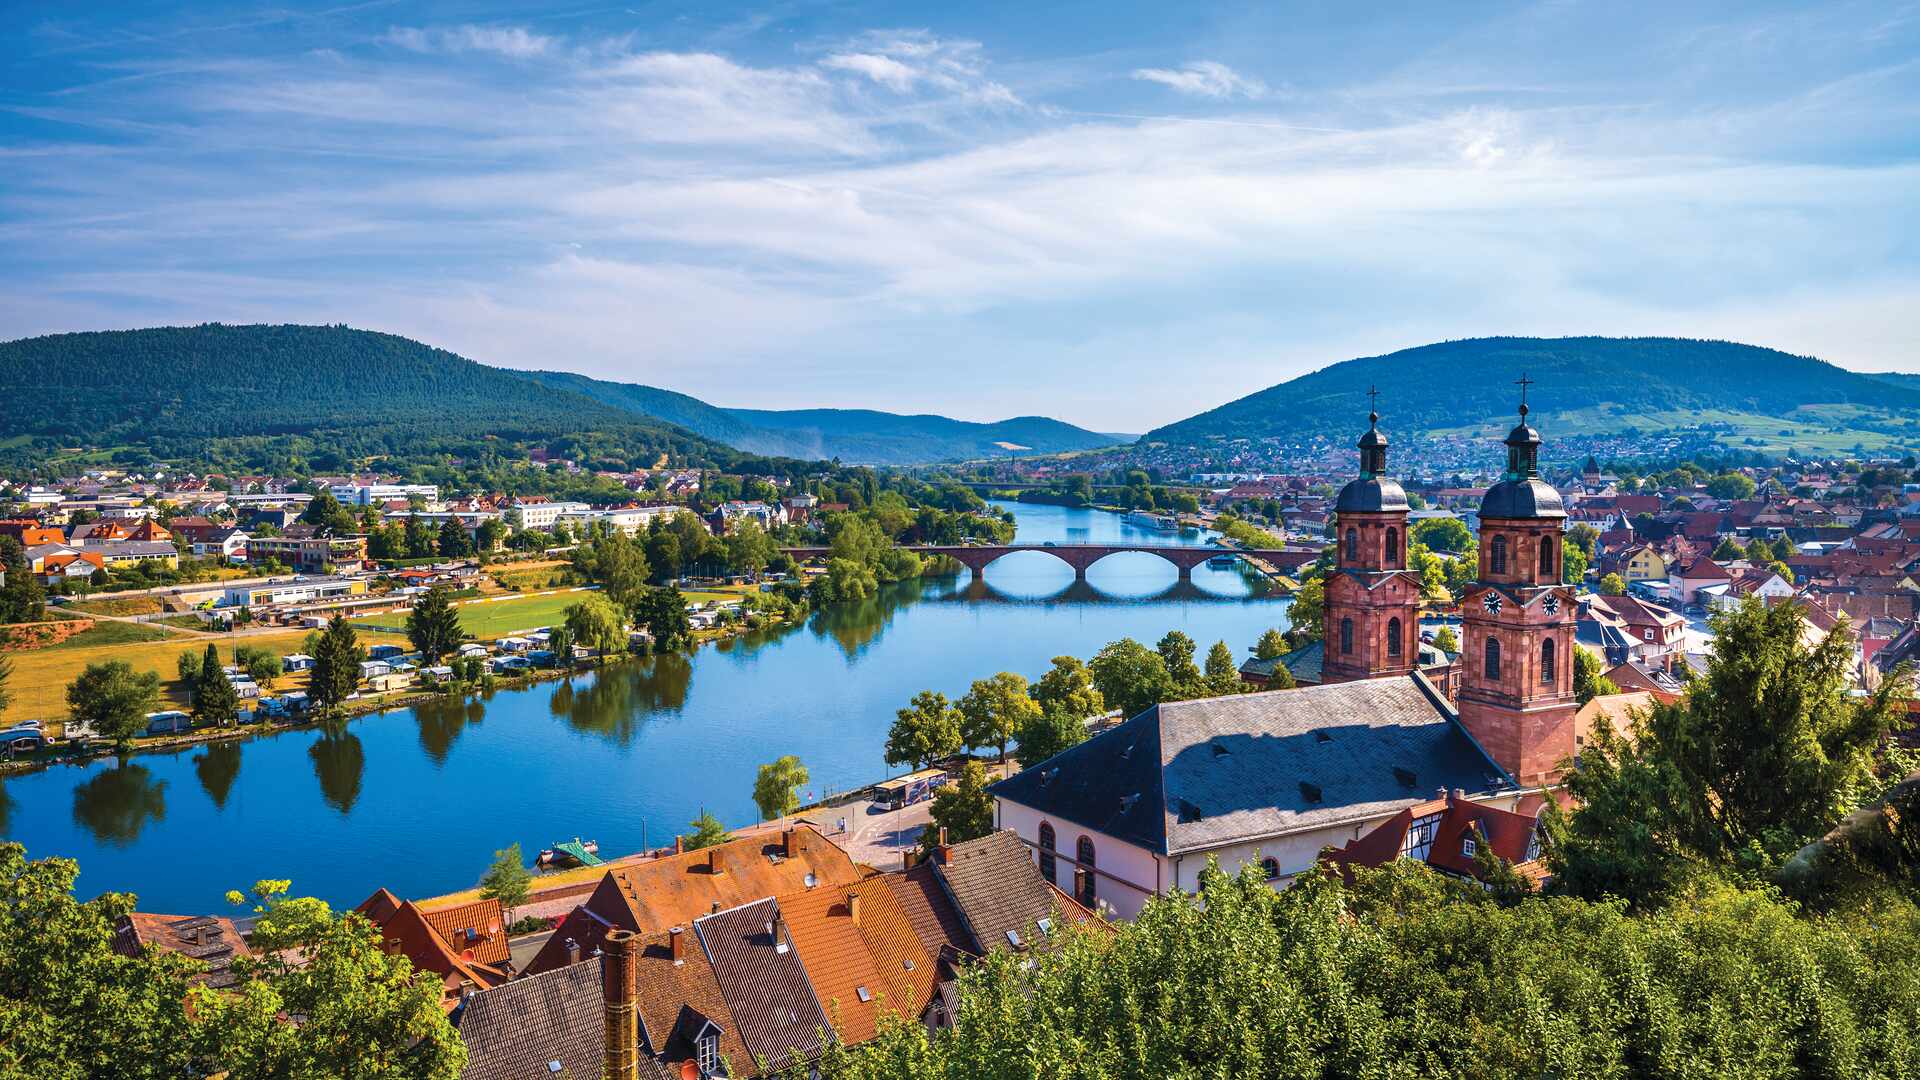 View of Miltenberg town and river, Germany